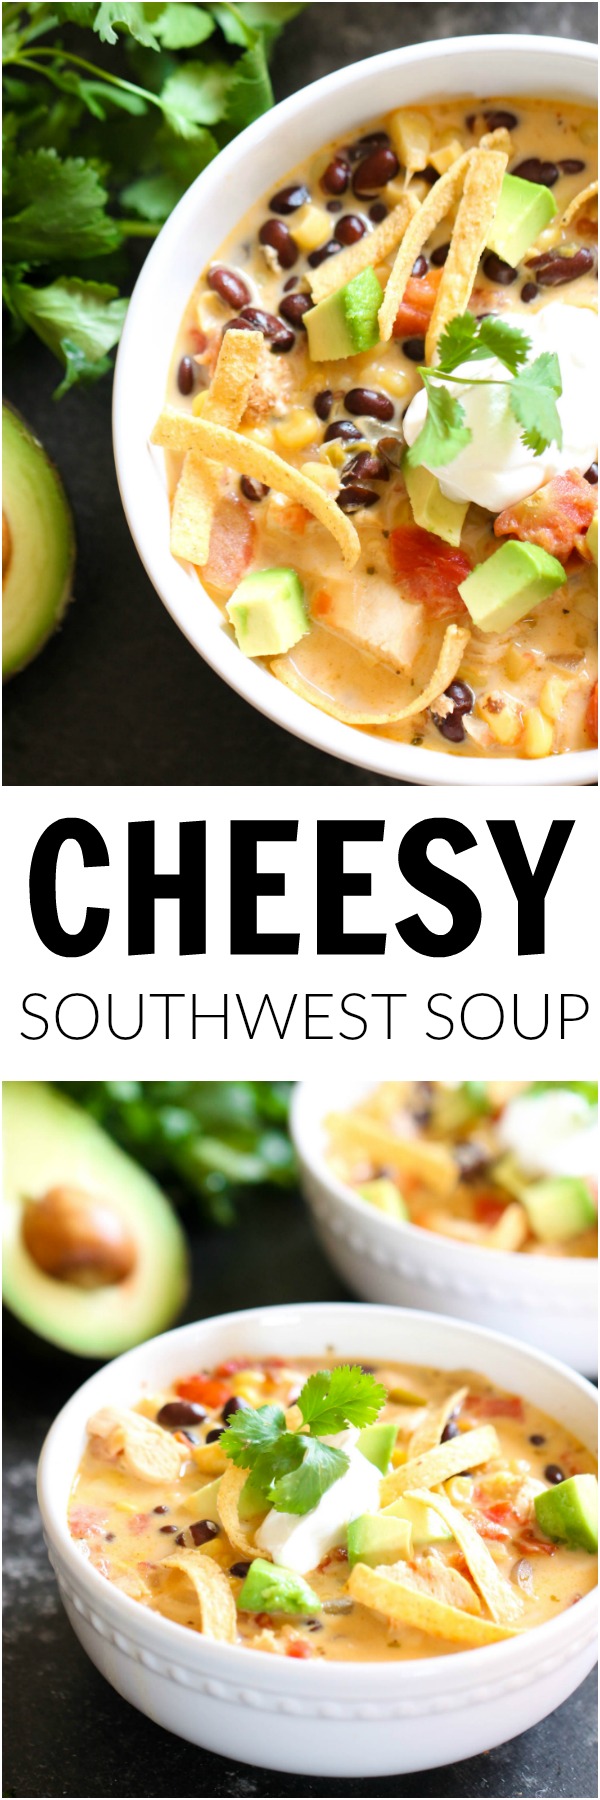 Cheesy Southwest Soup double image with soup and toppings